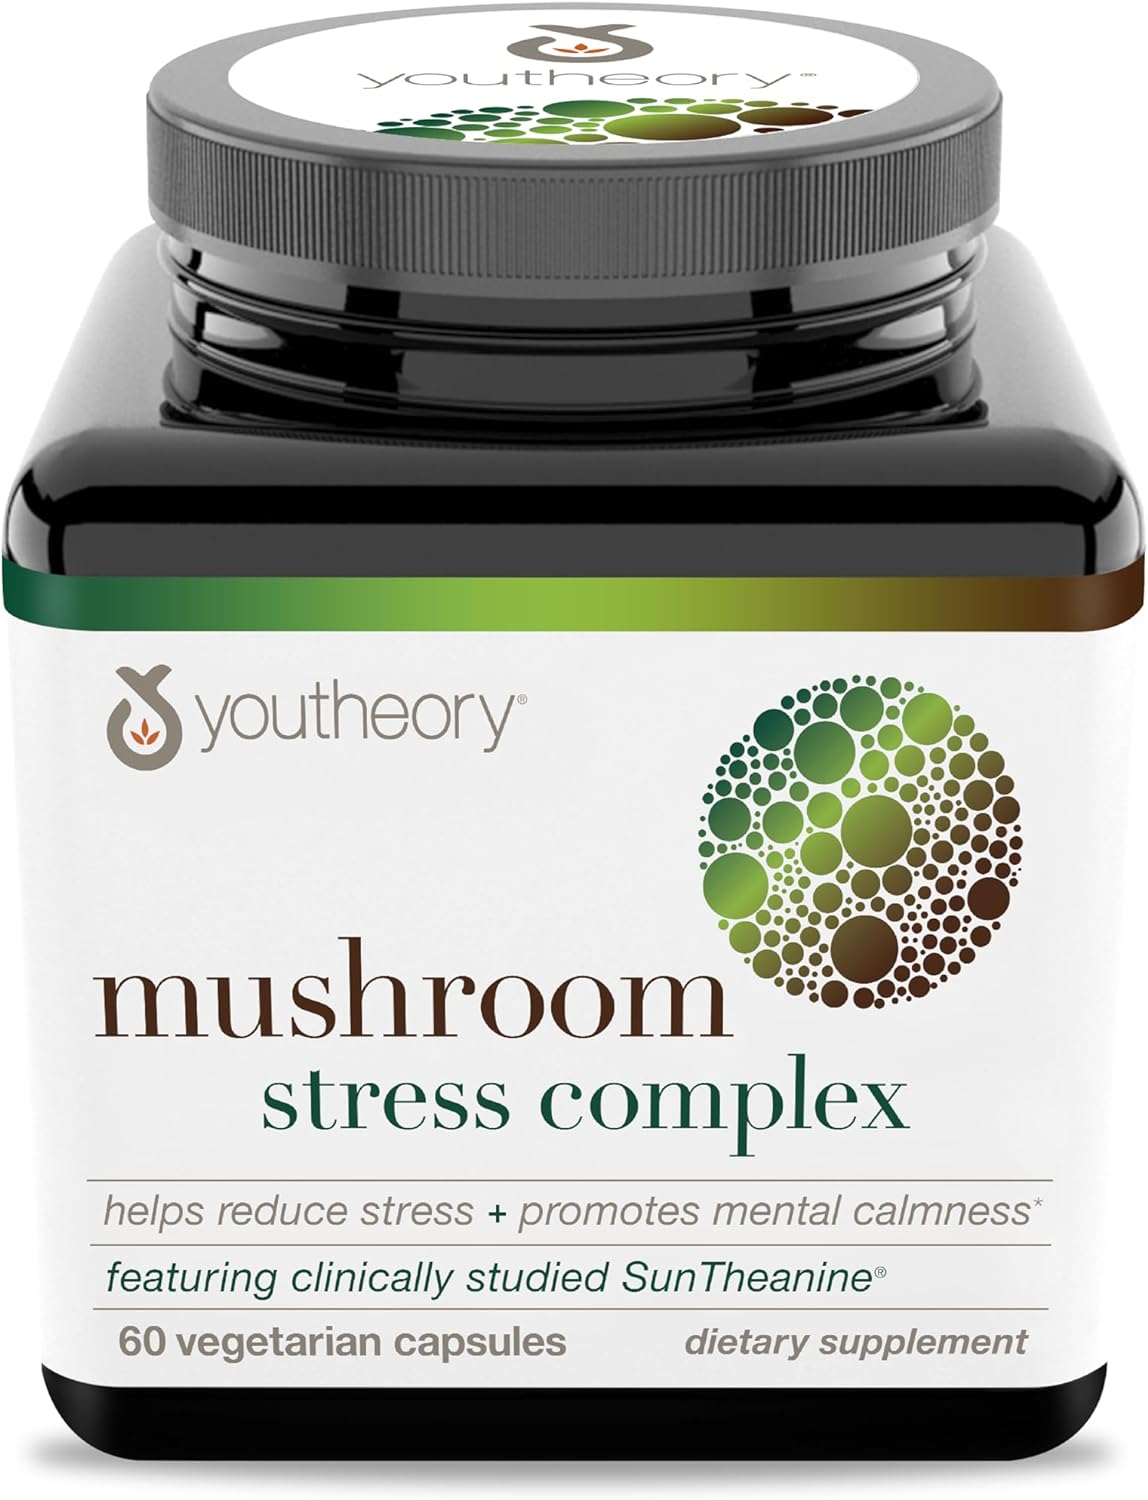 Youtheory Mushroom Stress Complex, Organic Full-Spectrum Mushrrom with L-Theanine, Help Reduce Stress and Promotes Mental Calmness, 60 Vegetarian Capsules